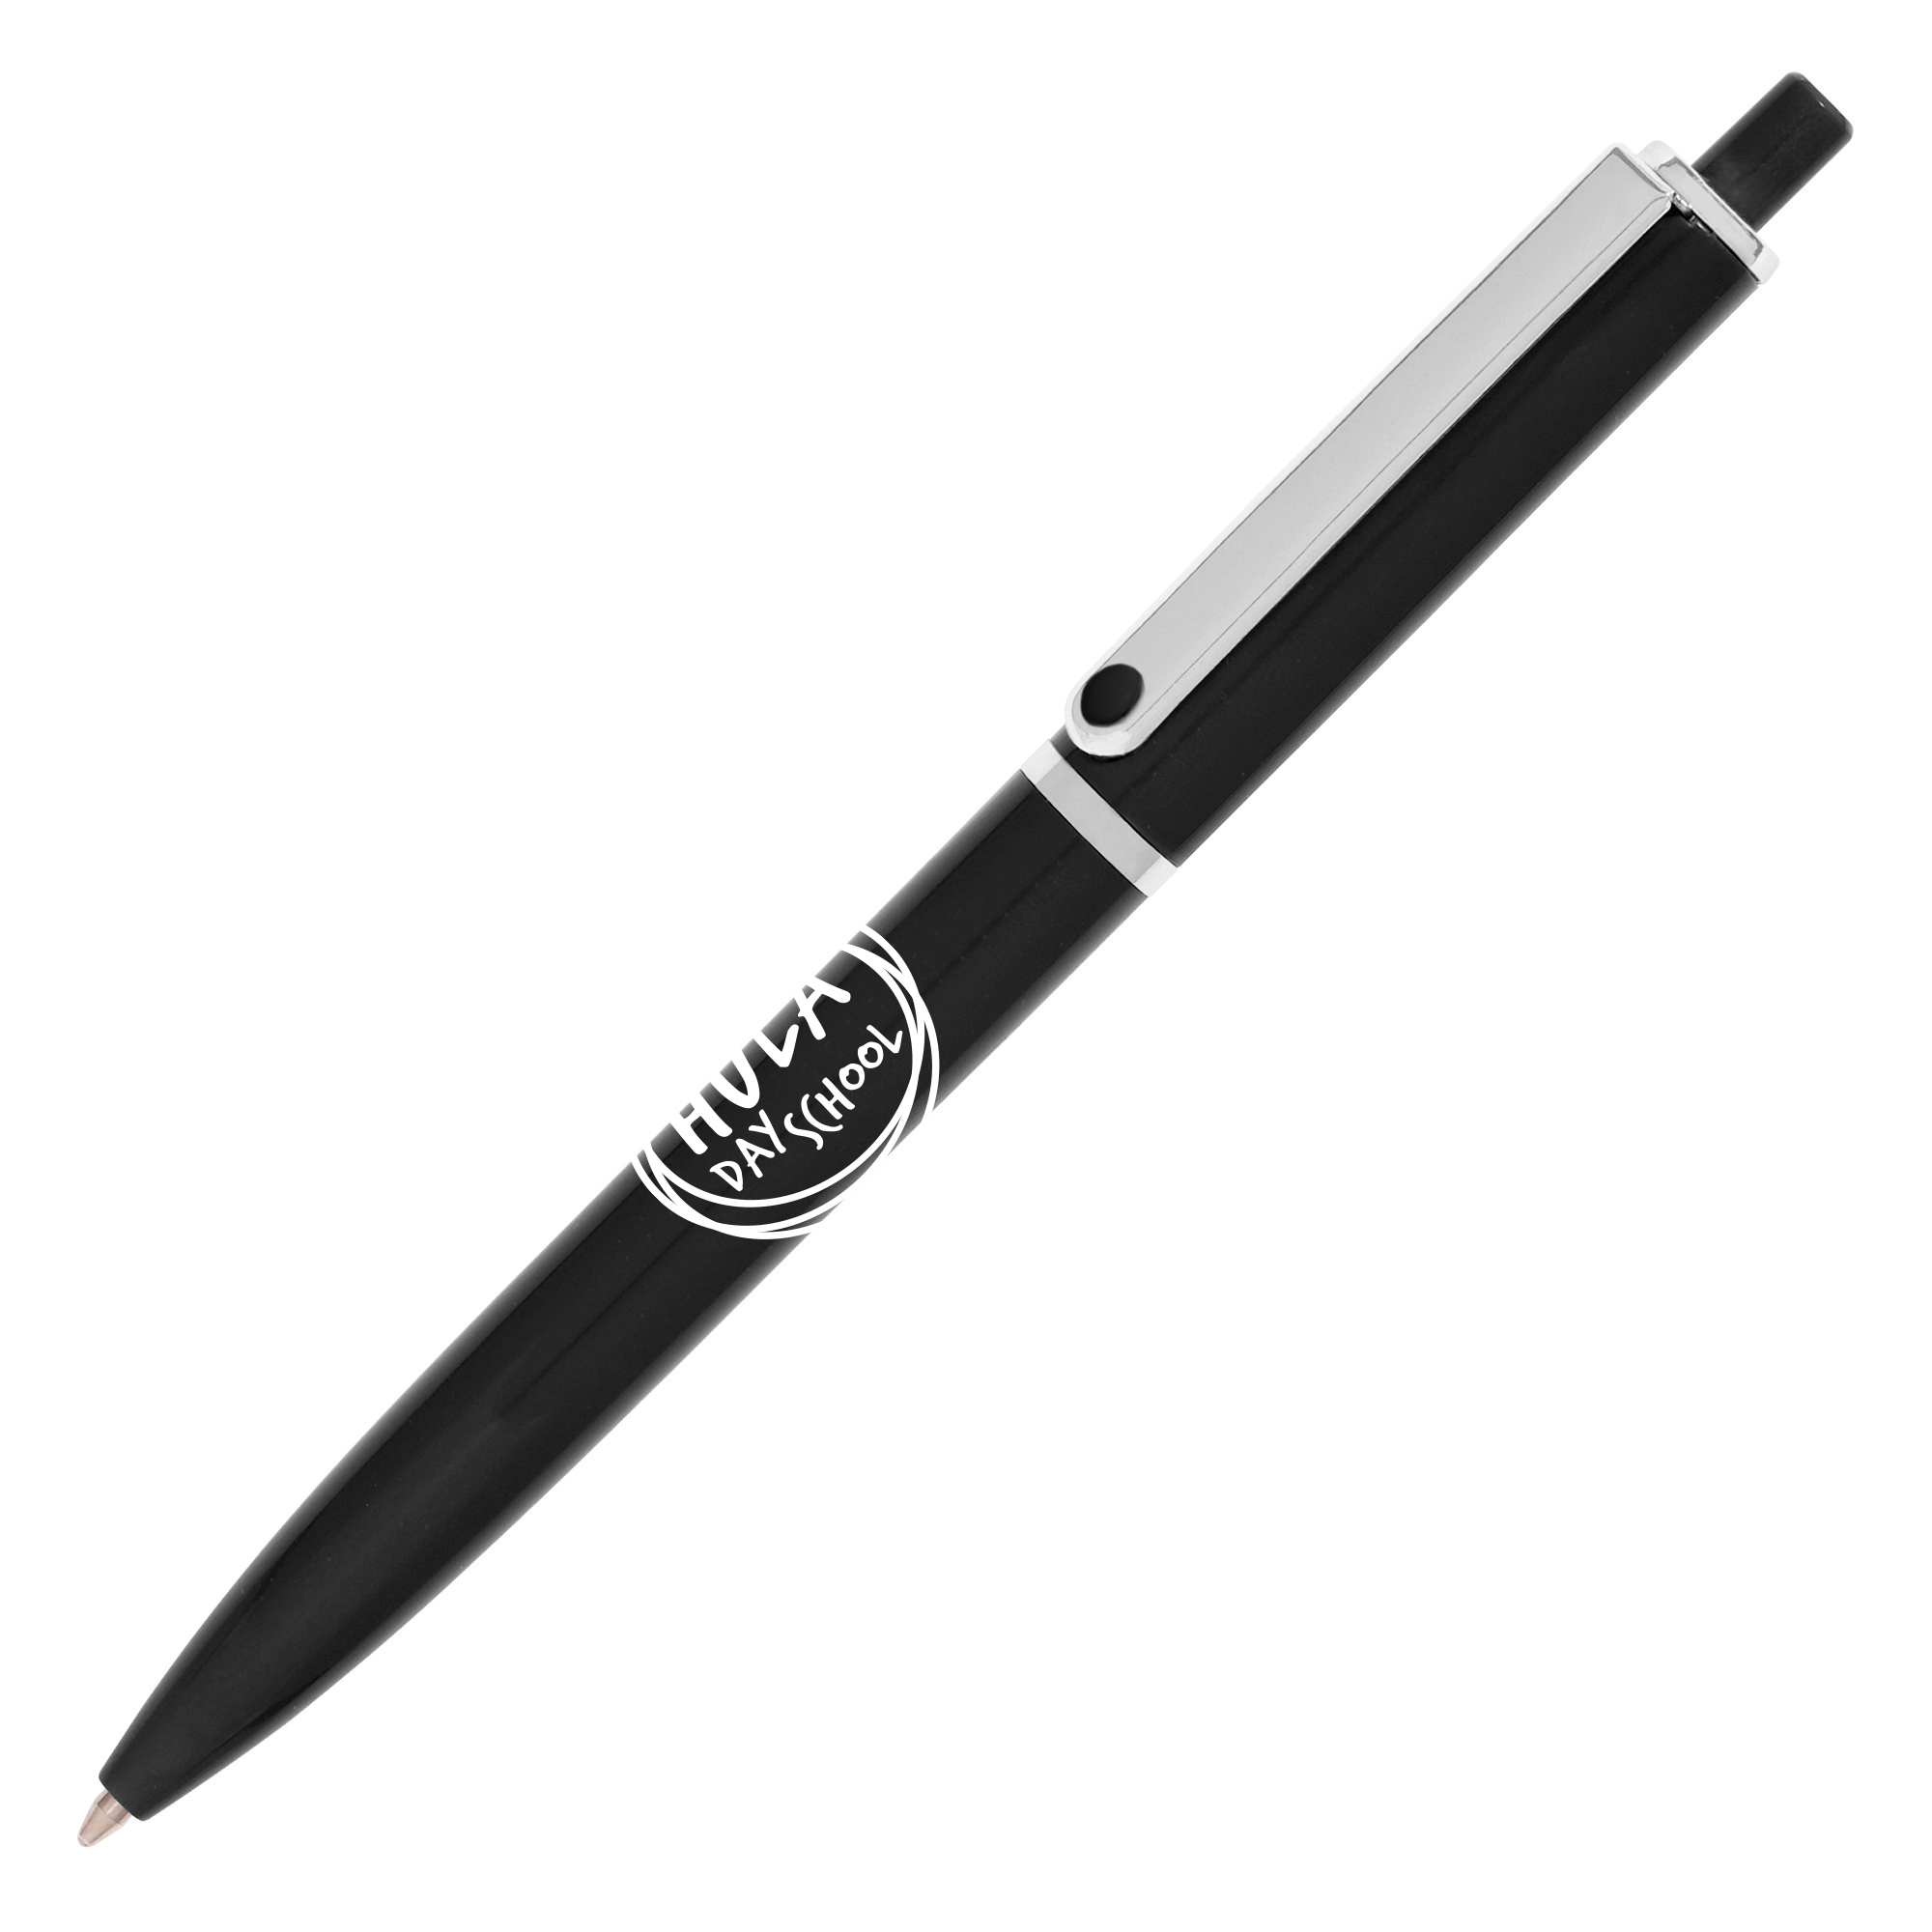 A plastic push action ball pen with metal trims for a high end feel on a budget. Choose from six popular colours.